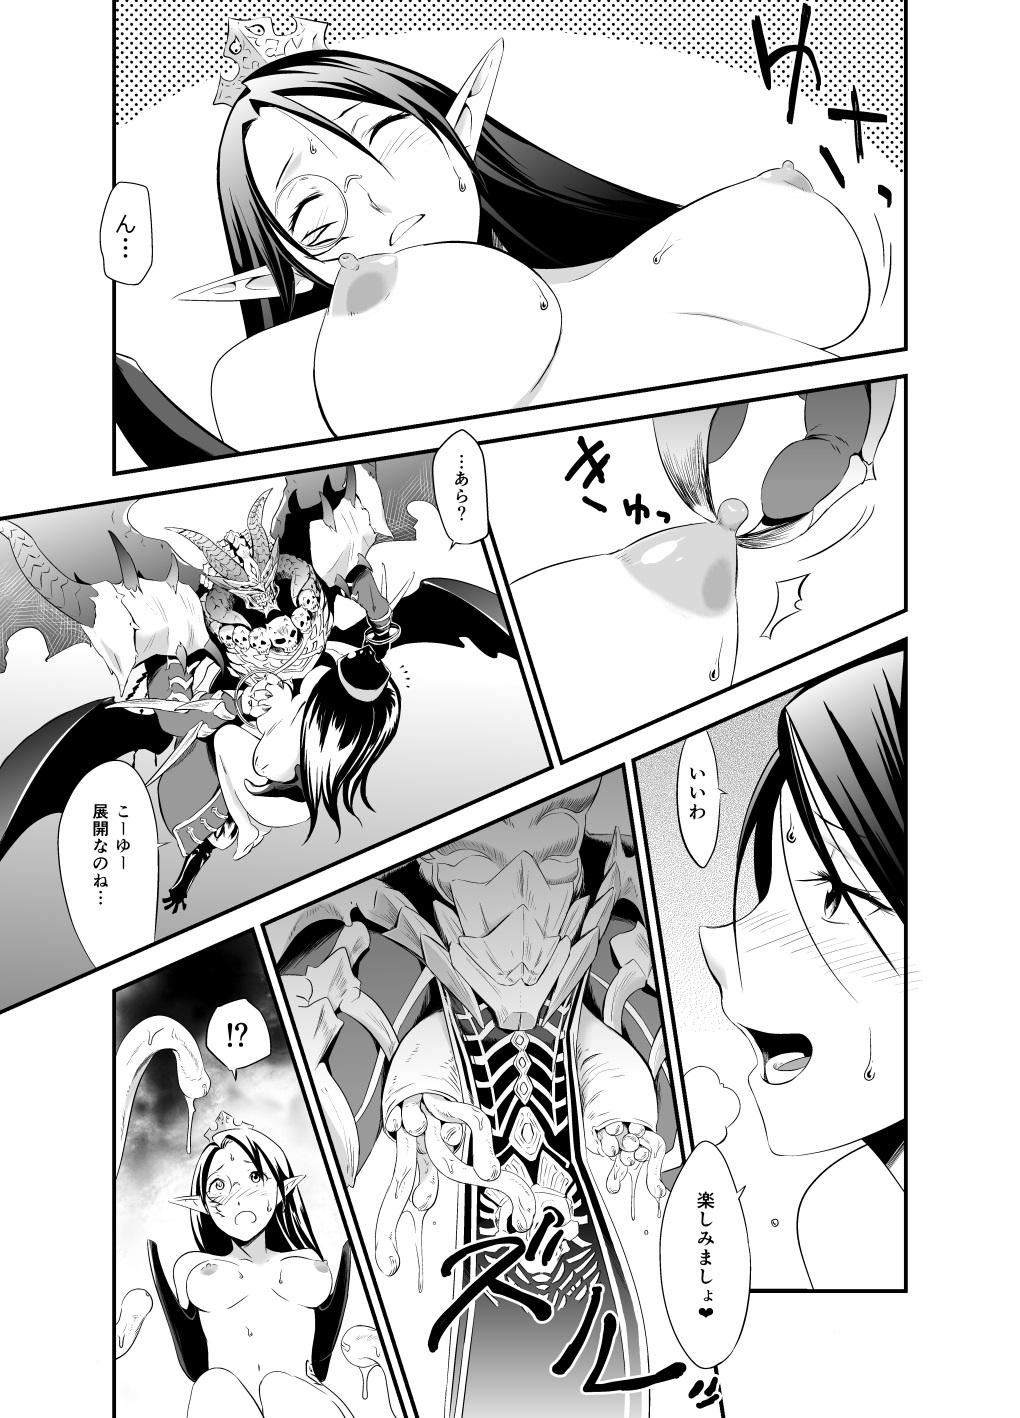 Indian Sex 3rd Ride - Cardfight vanguard German - Page 9